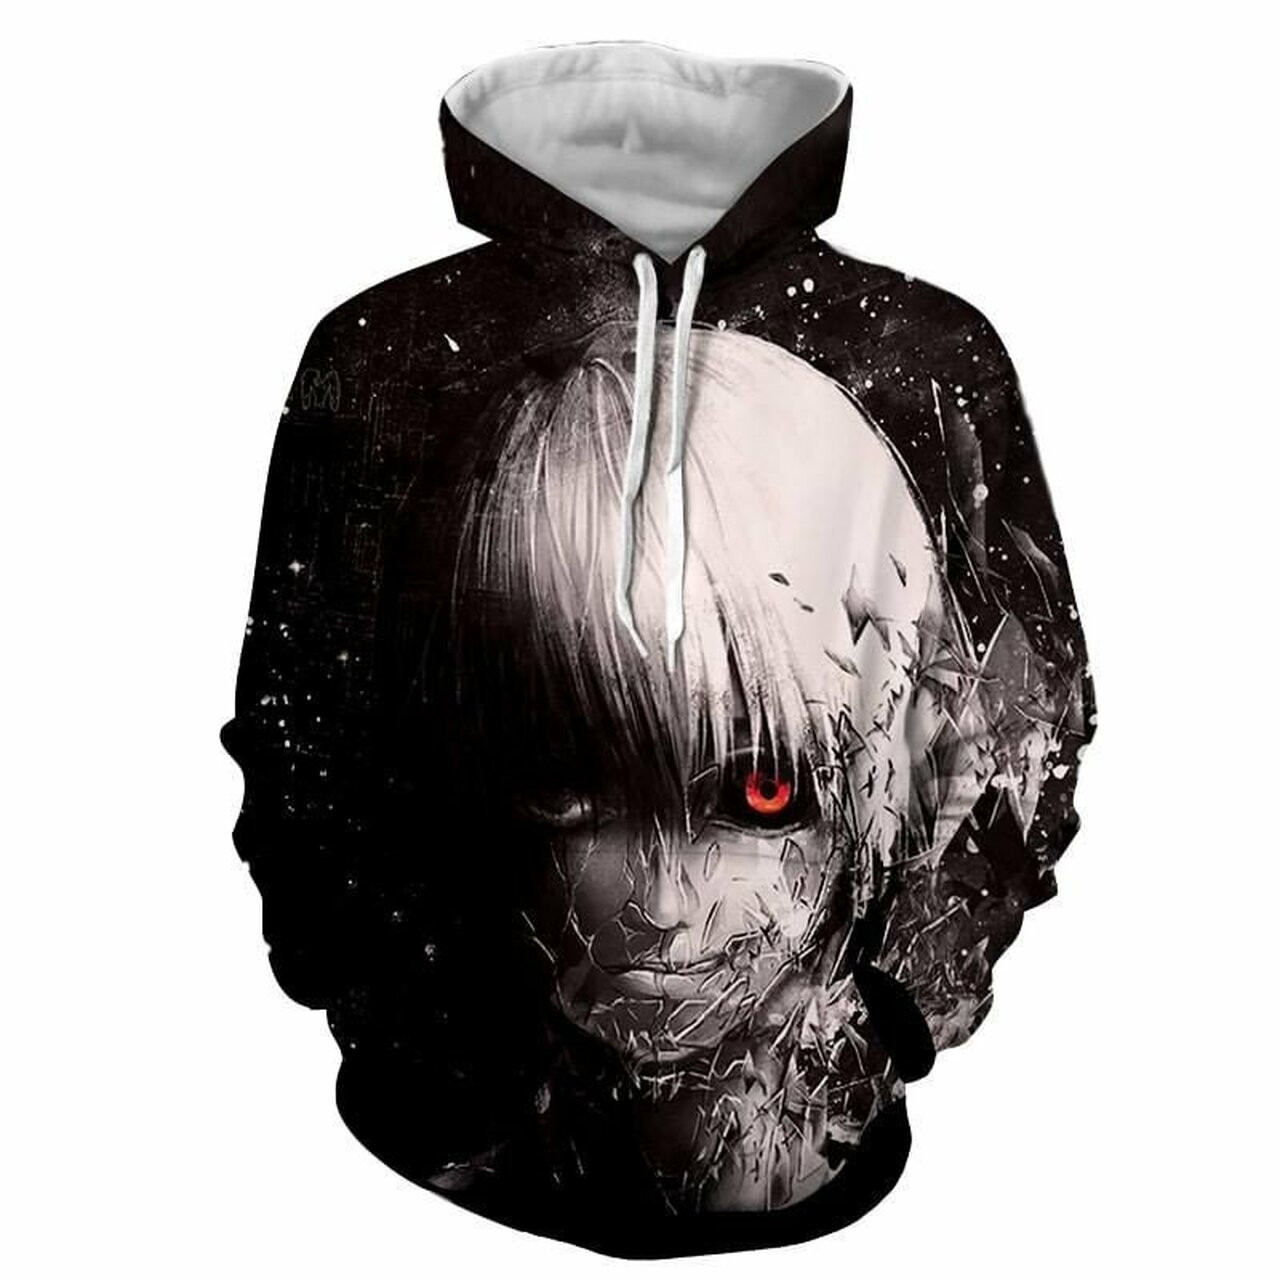 Eto Yoshimura Owl King Gore Tokyo Ghoul 3d All Over Print Hoodie